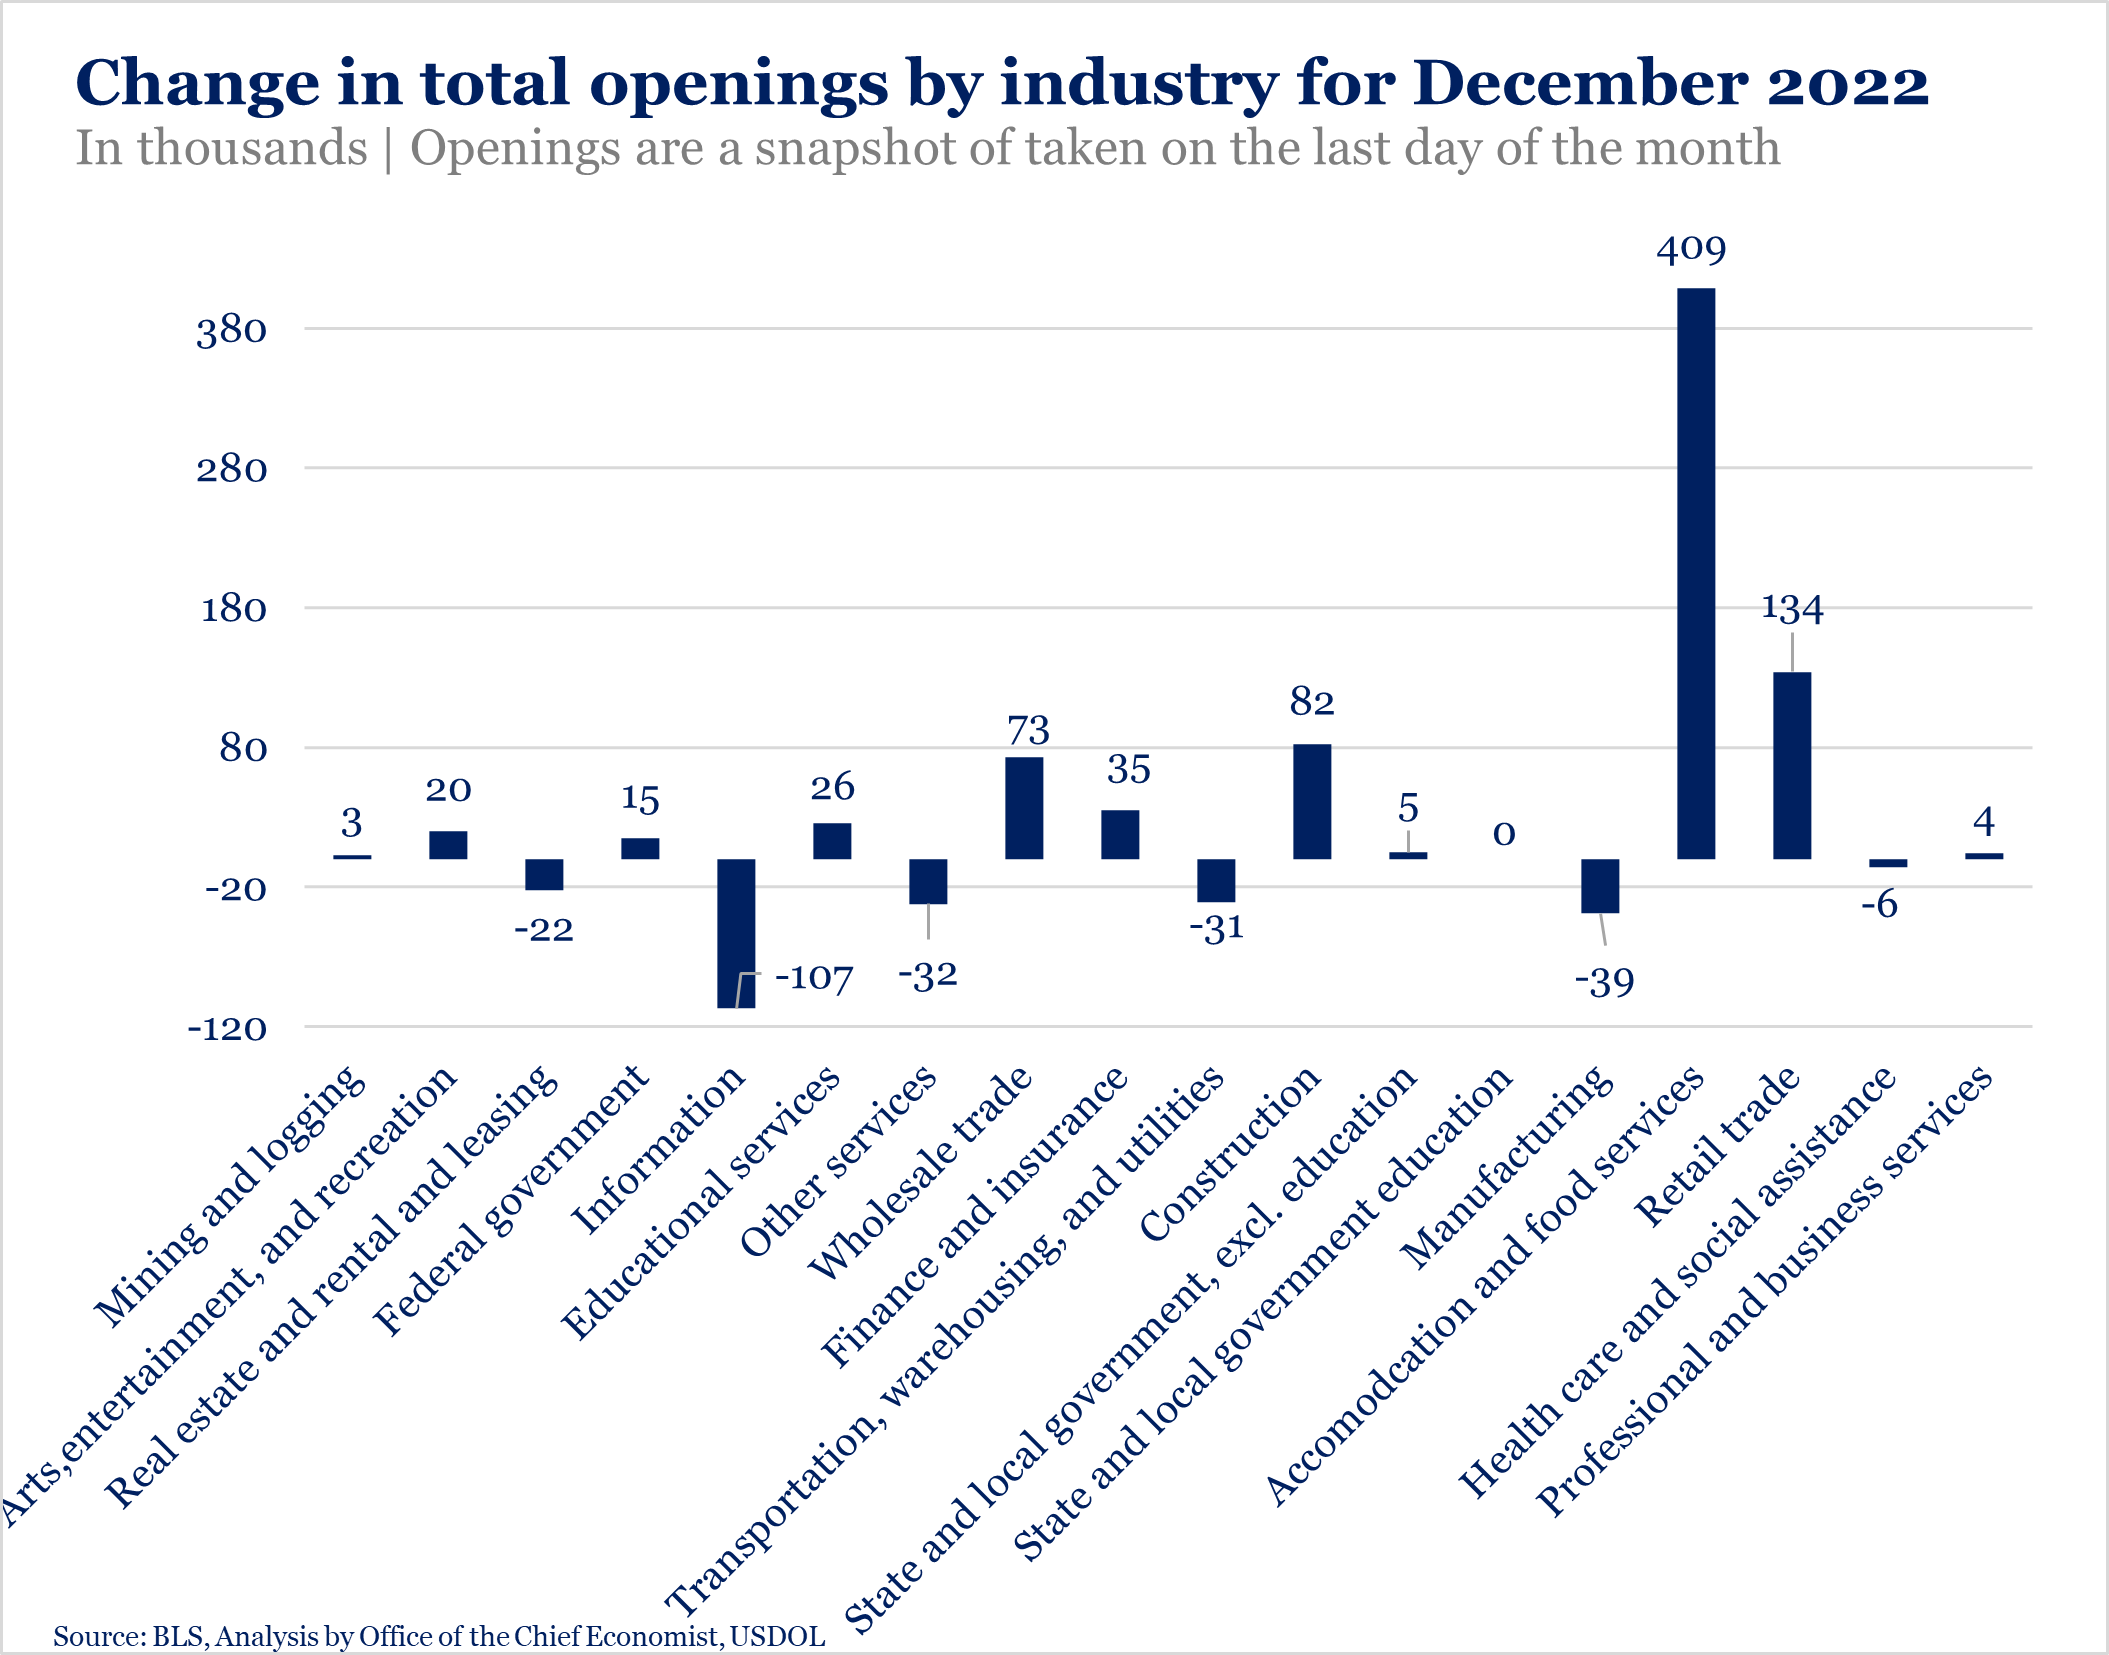 Change in Total Openings by Industry for December 2022